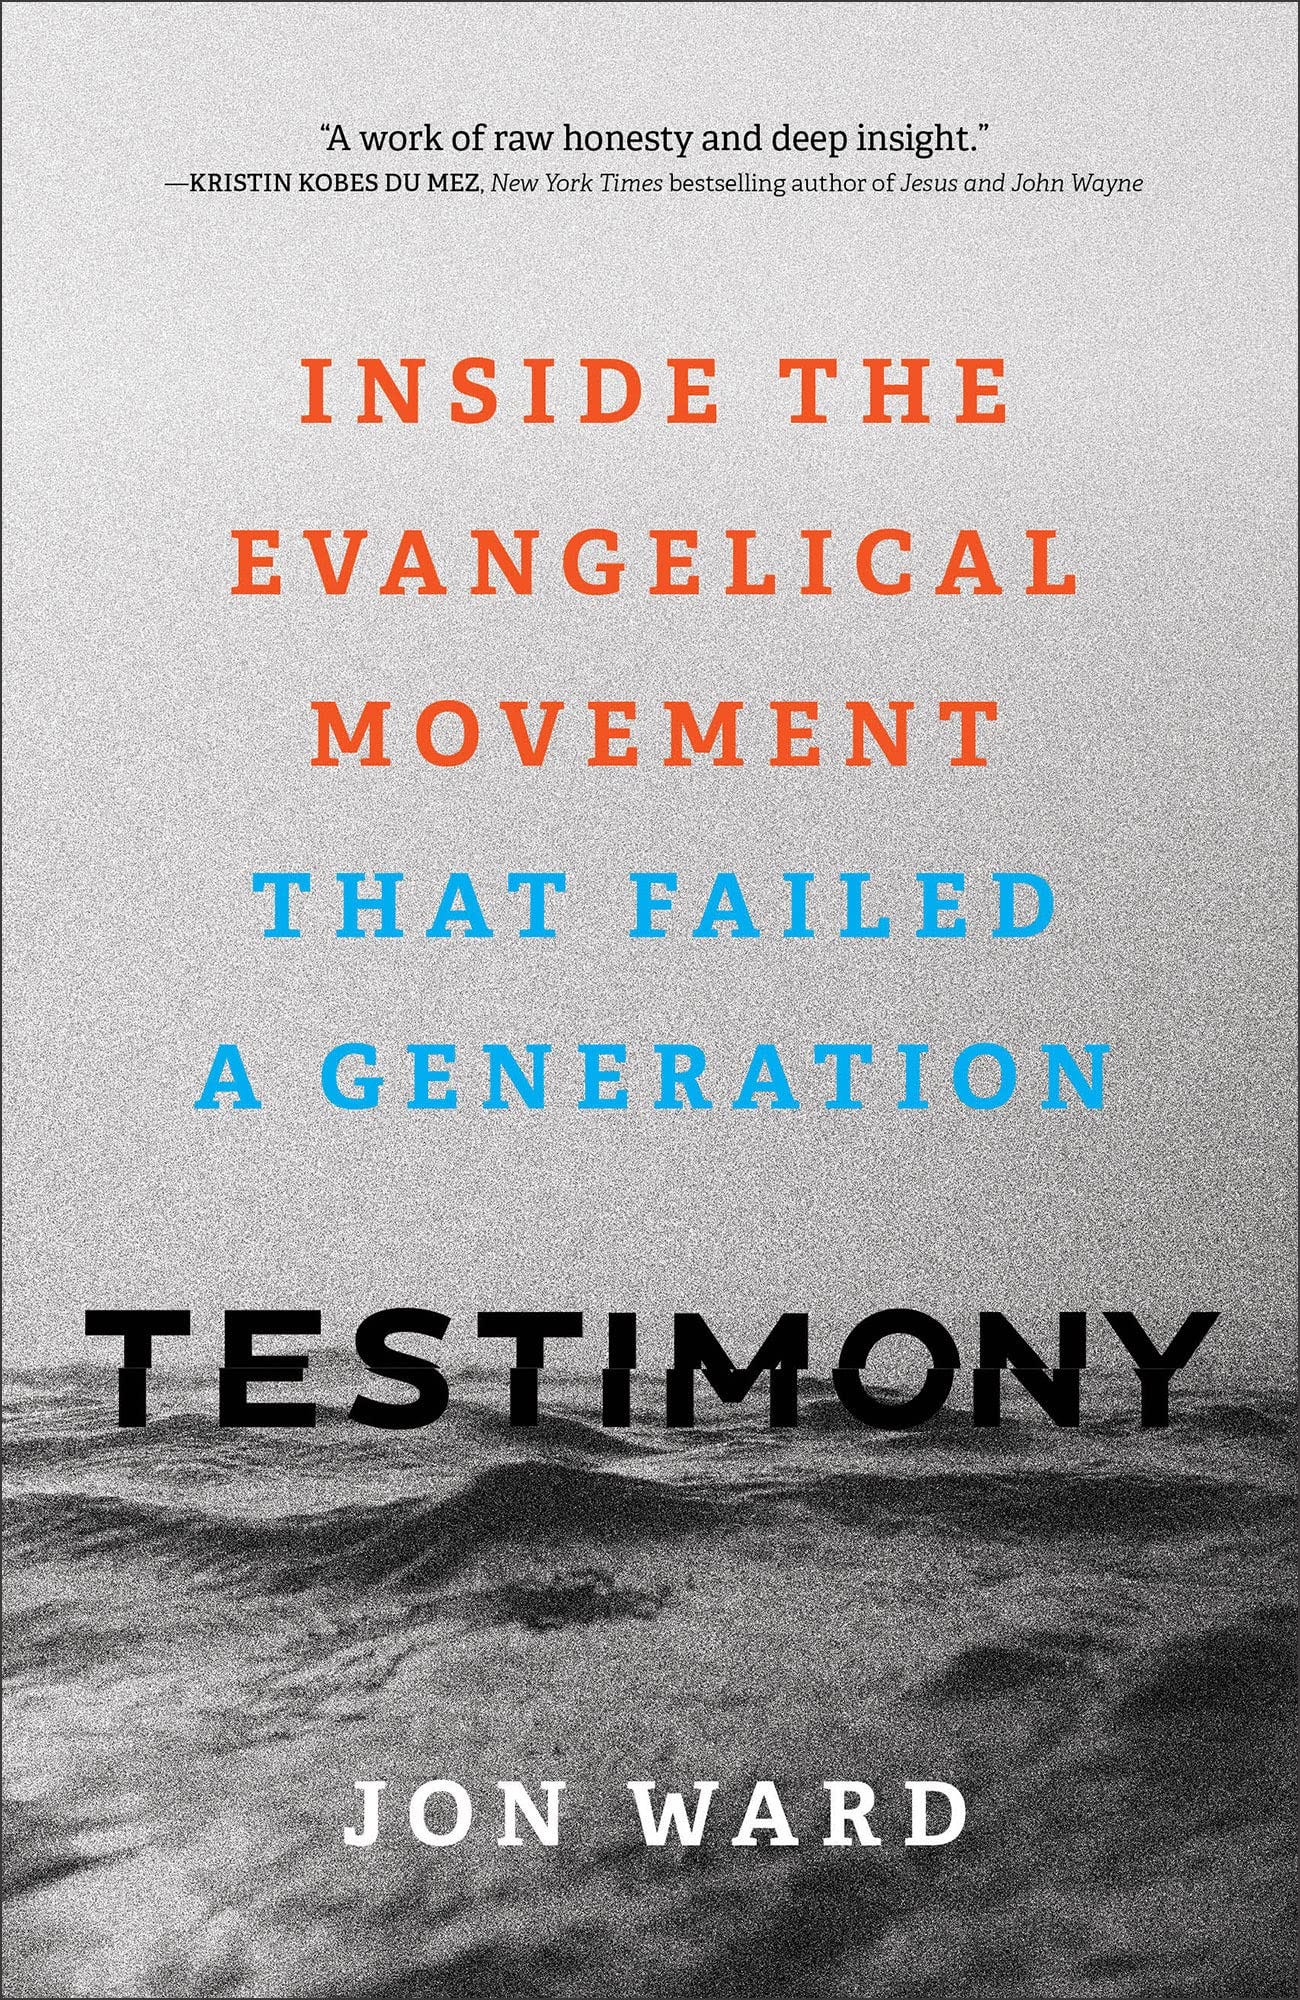 Book cover of Testimony by Jon Ward